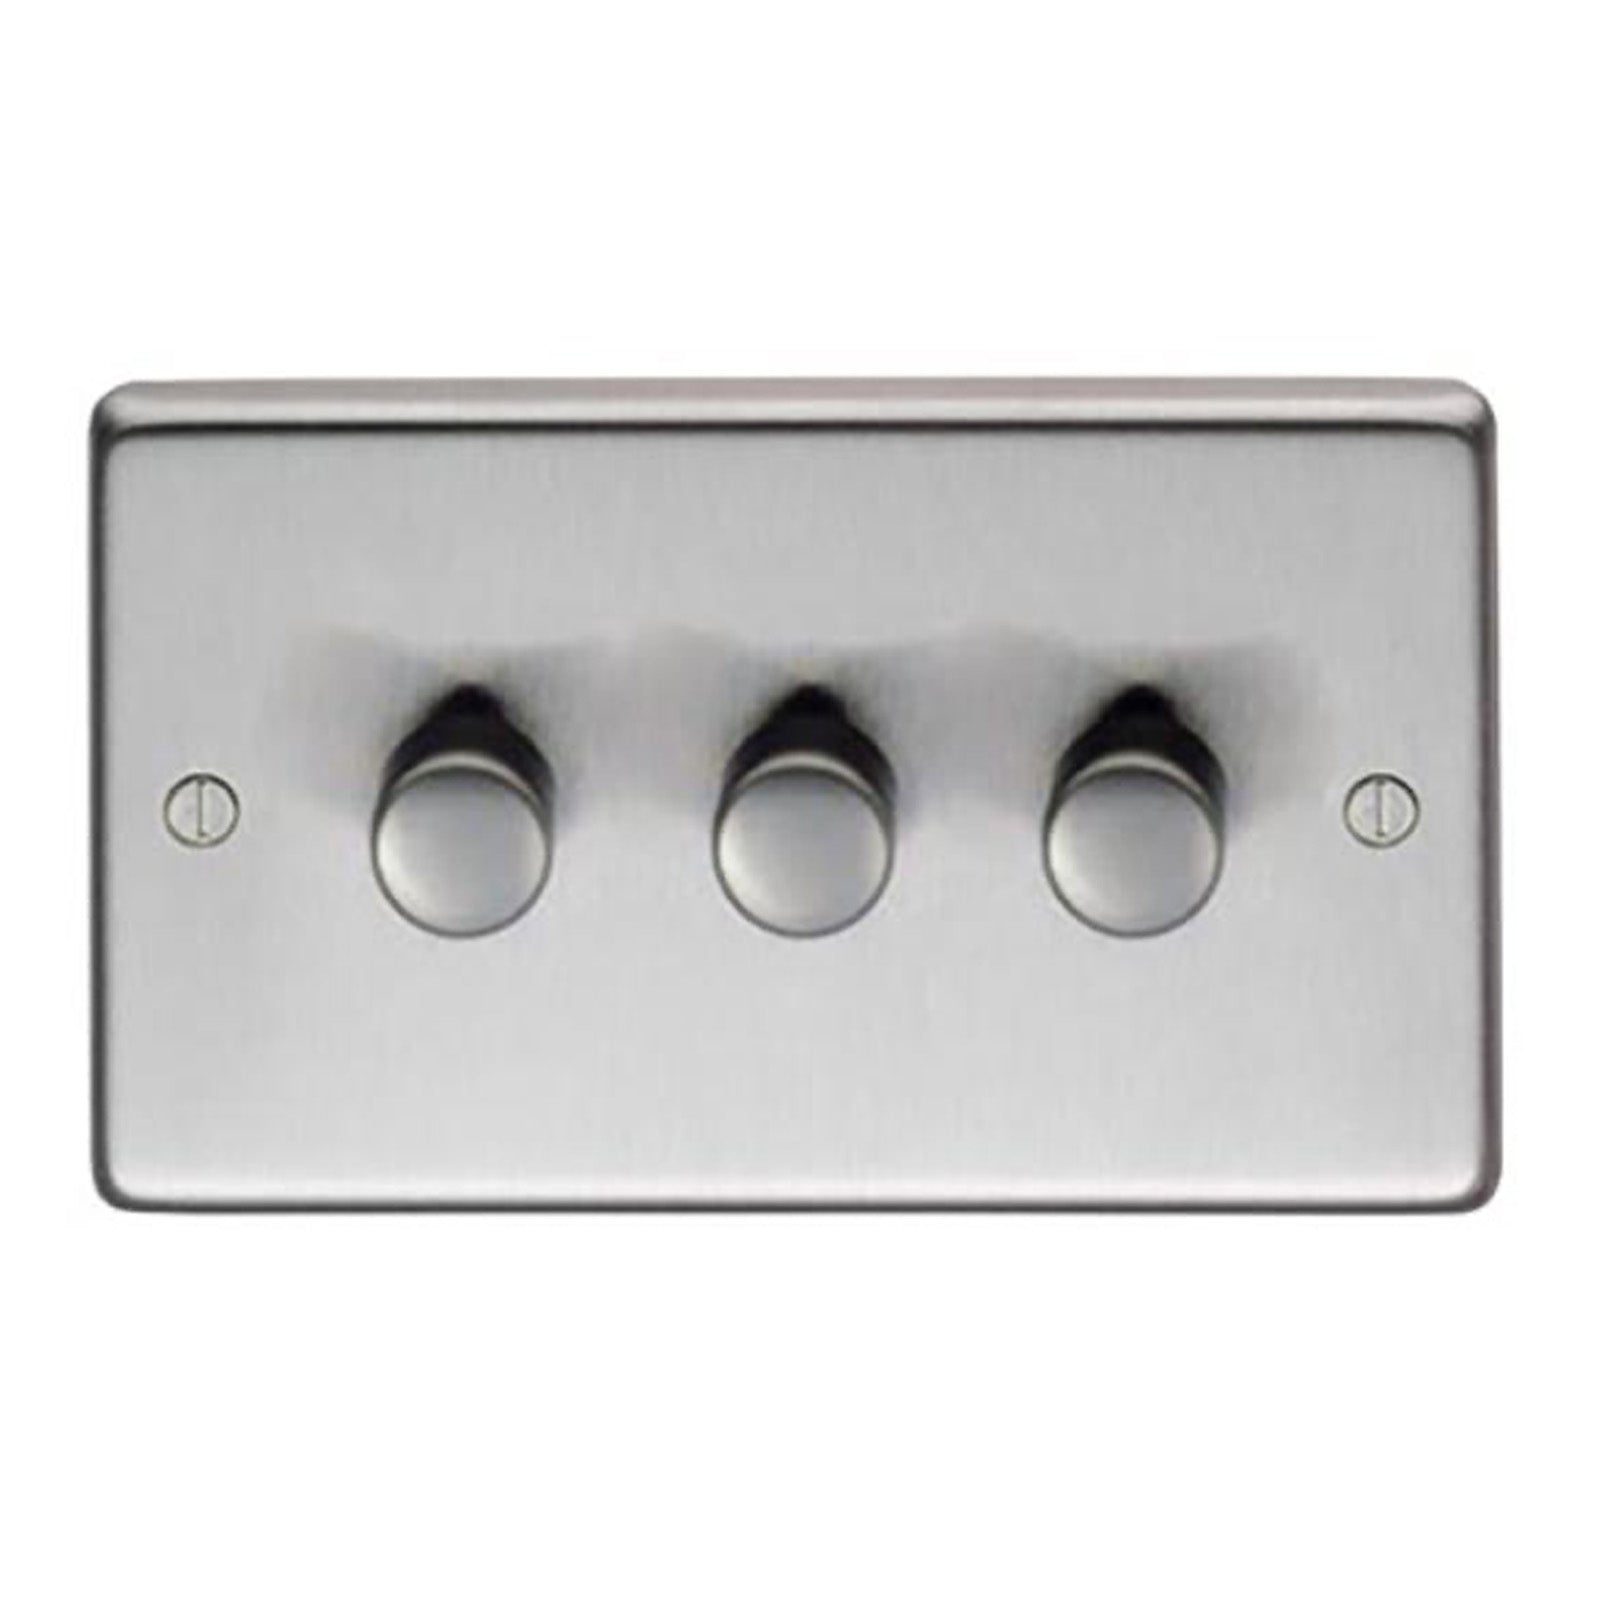 SHOW Image of Triple LED Dimmer Switch with Satin Stainless Steel finish